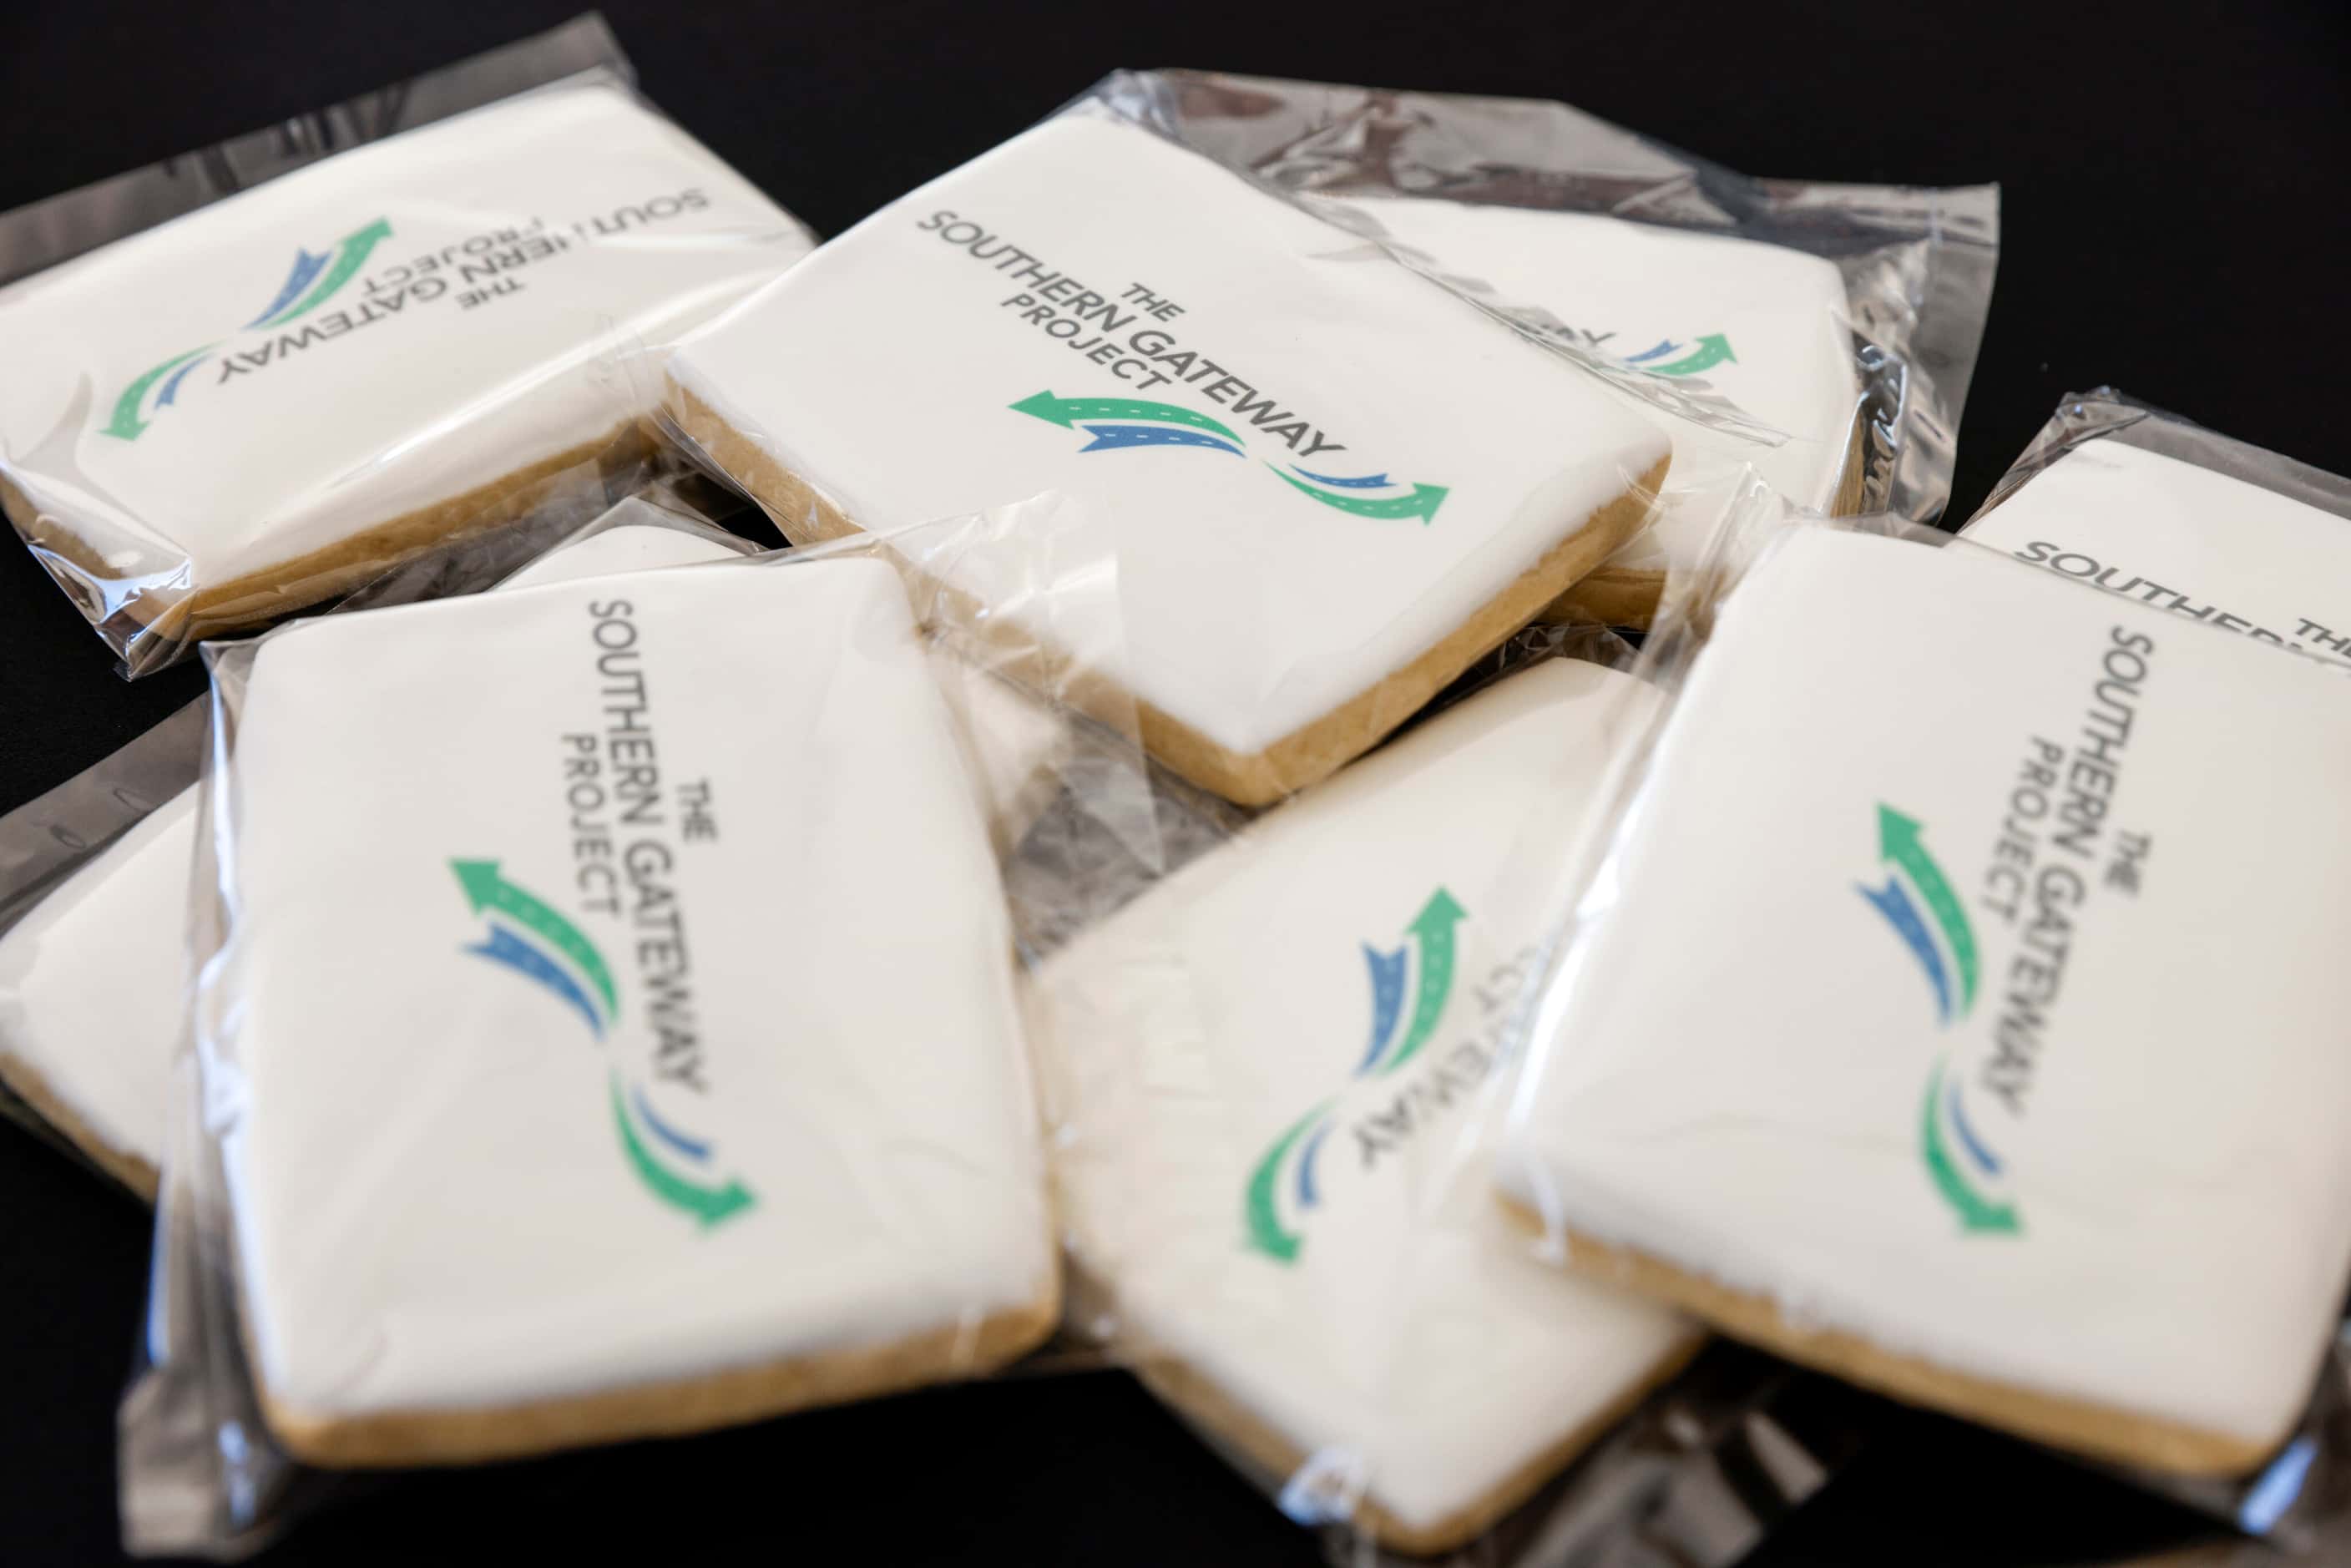 Southern Gateway project cookies sit on a table before g a news conference about the deck...